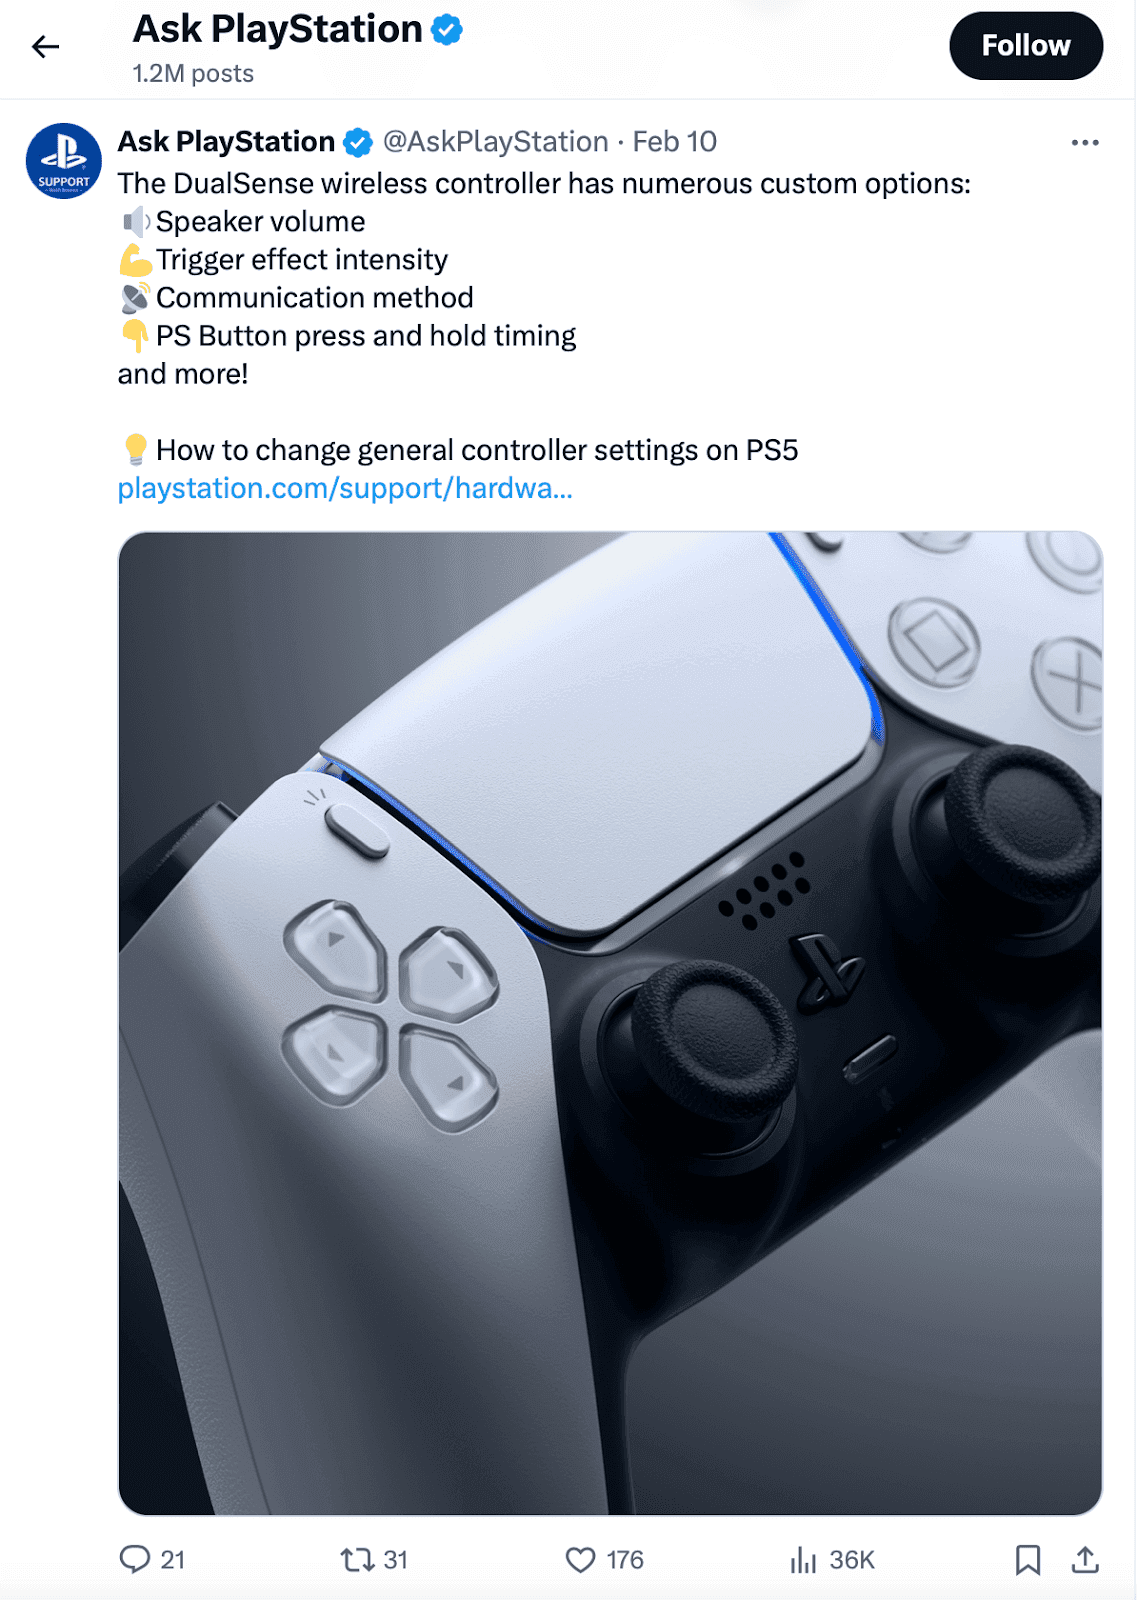 Playstation tweet of frequently asked questions about their new controller